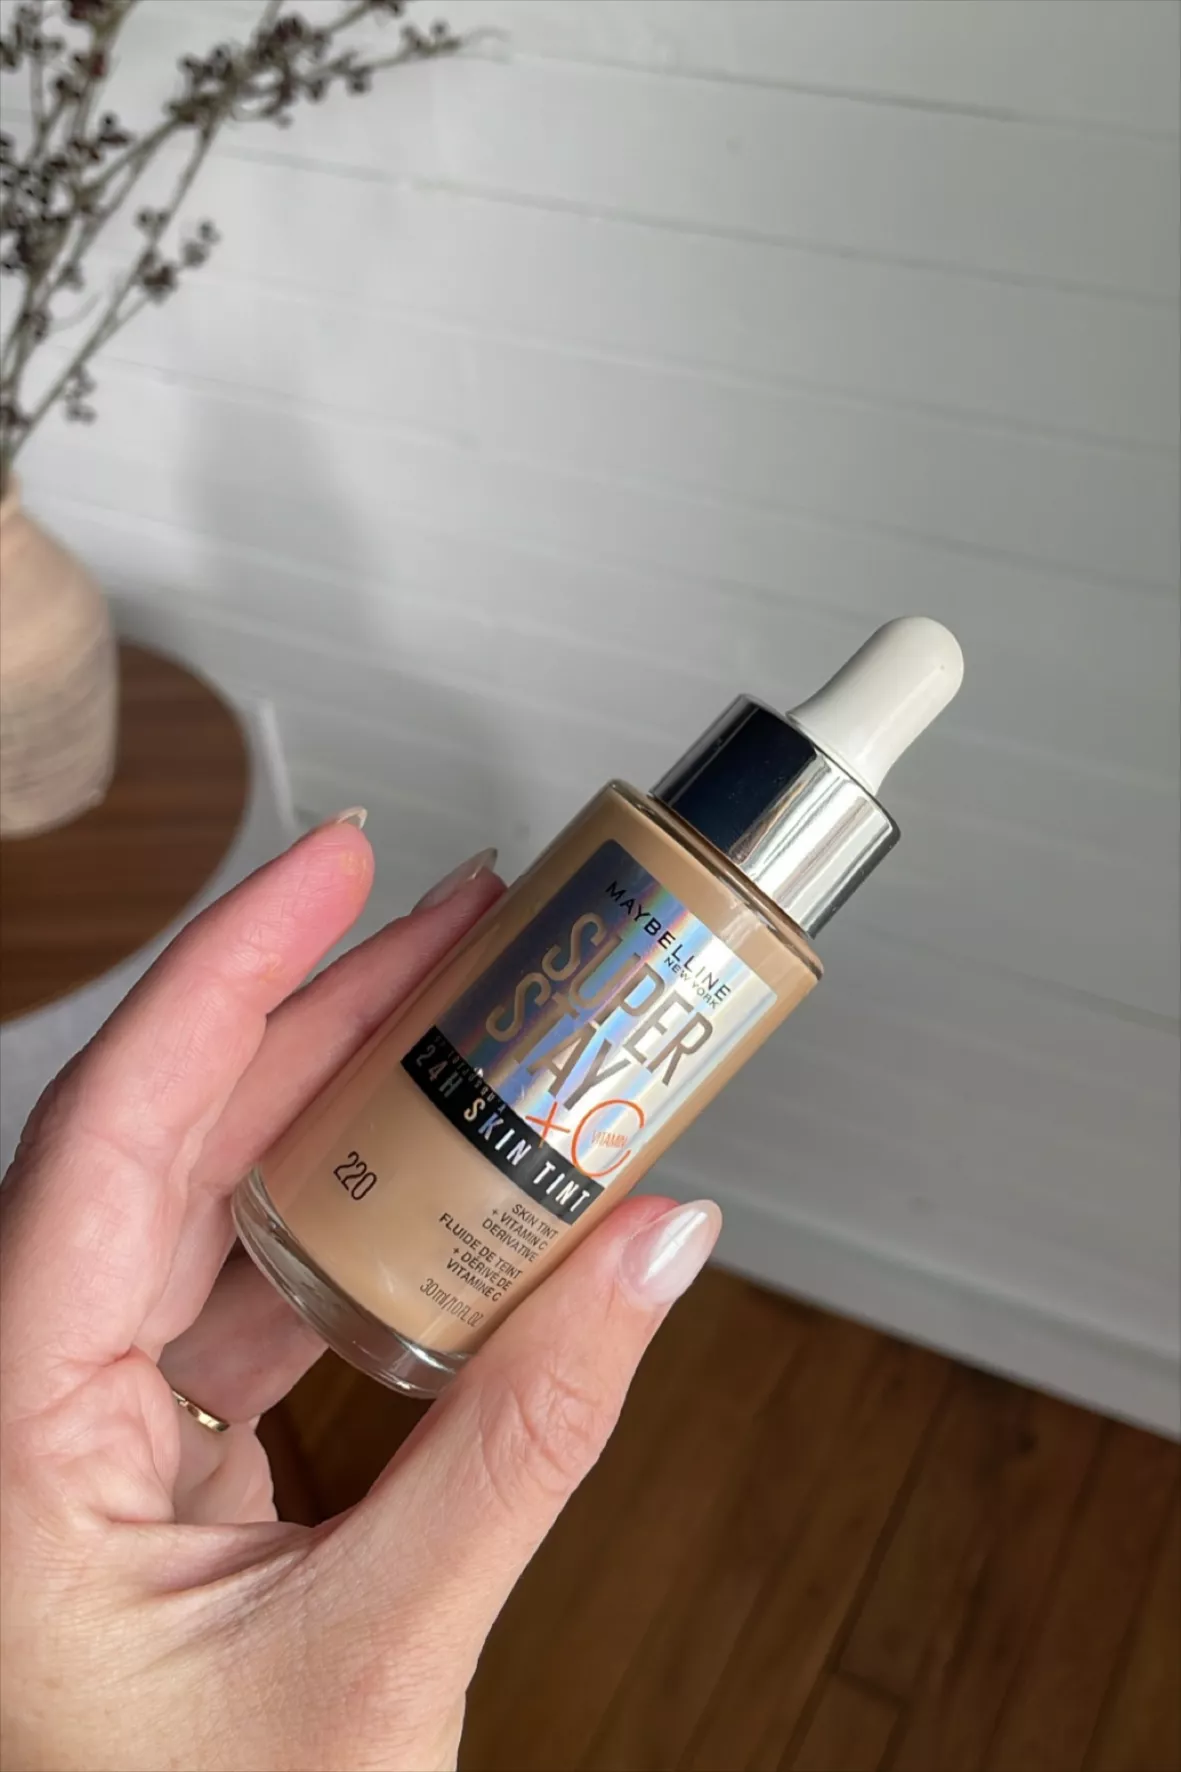 Maybelline Super Stay Skin Tint Foundation, With Vitamin C